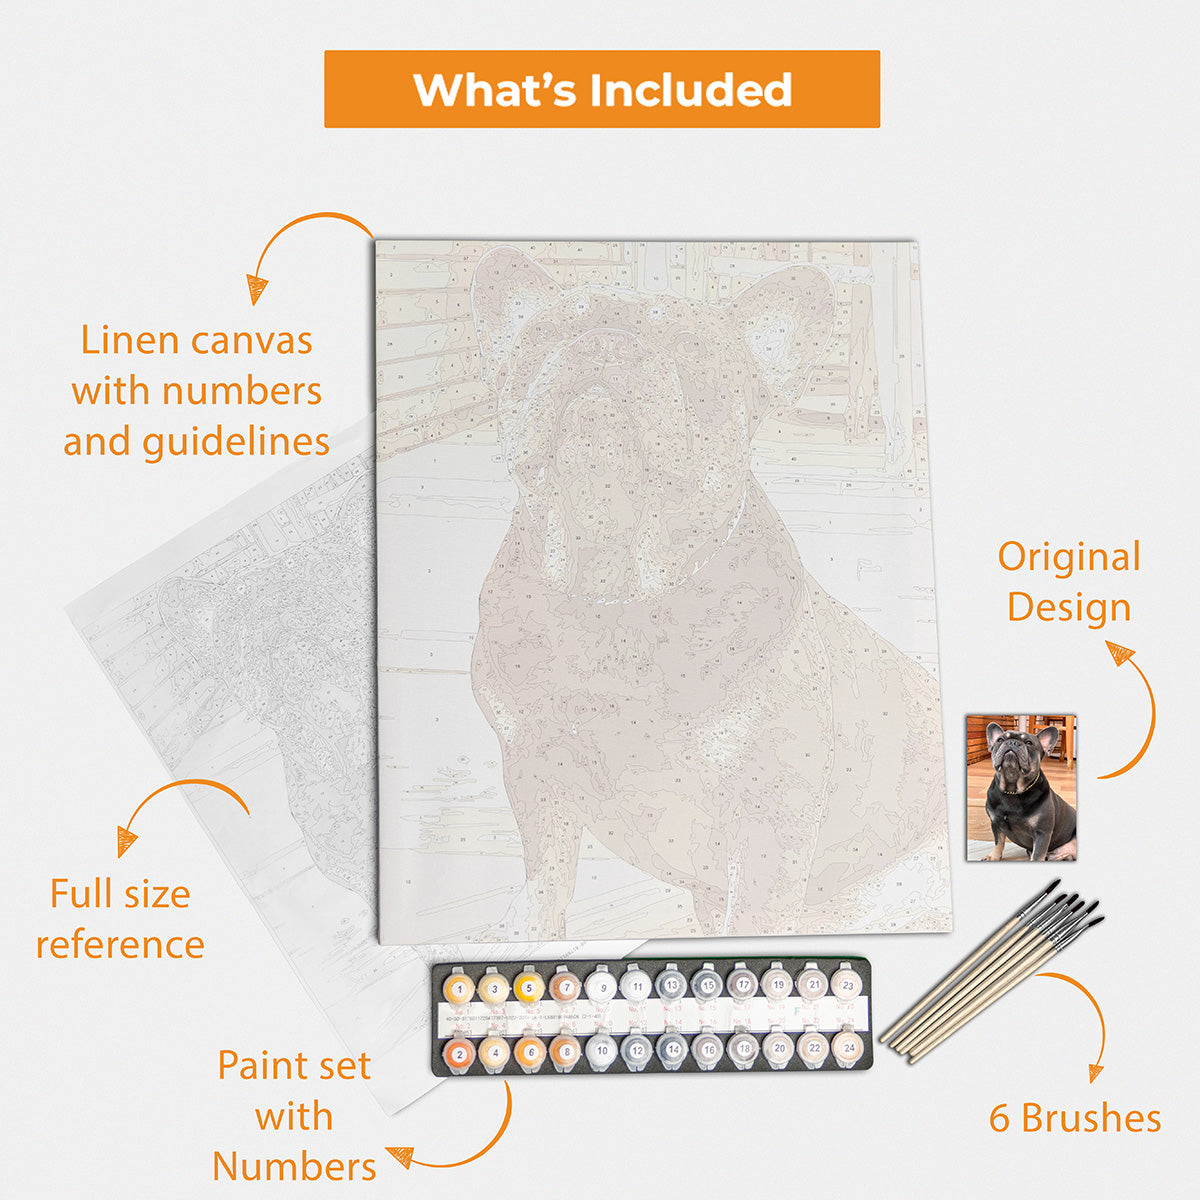 Personalised Adult Paint by Number Kits, Custom Paint by Numbers Your Own  Photo, With Acrylic Paint Brush Set 